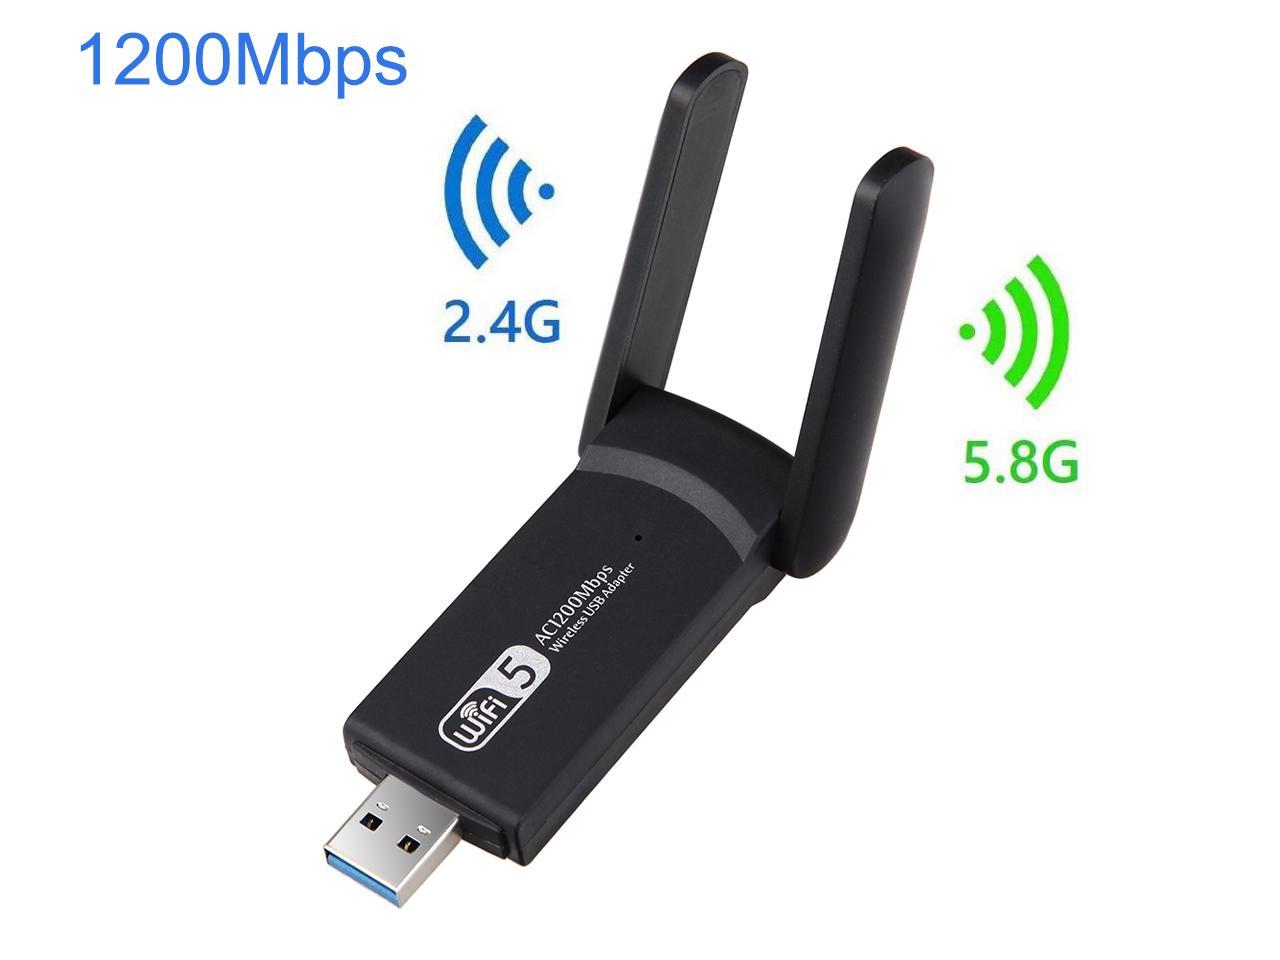 WiFi Card Wireless Adapter Dual Antenna USB Wireless WiFi Dual-Band Network Card Adapter for Xbox 360 Game Console